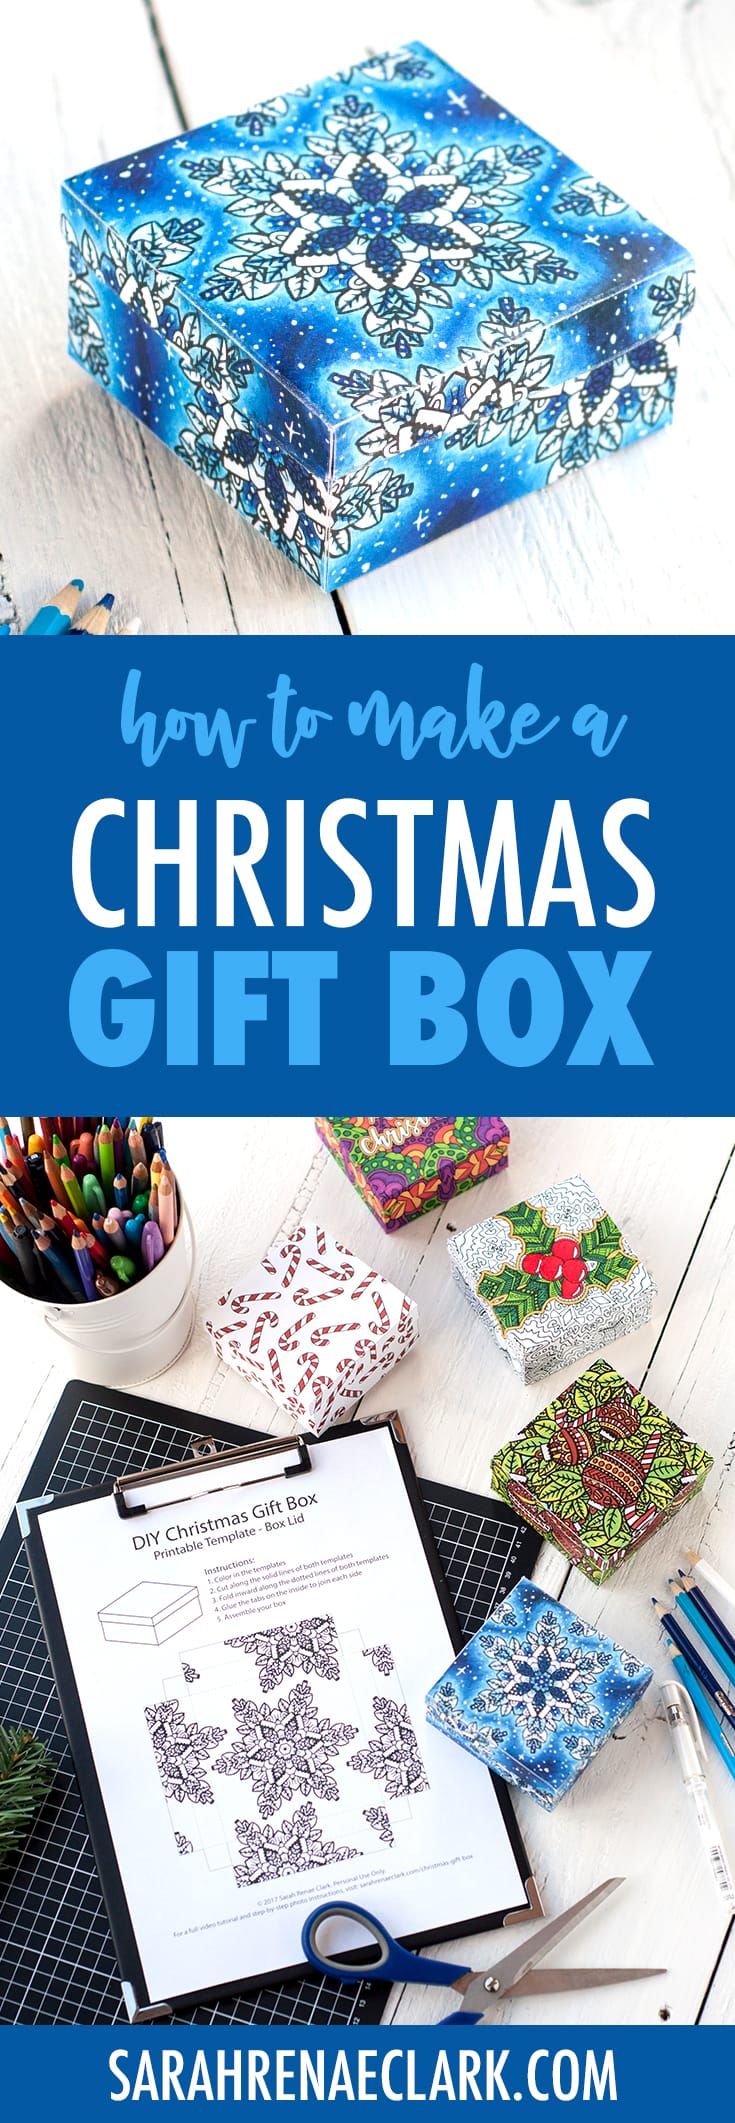 Learn how to make a Christmas gift box with this printable template and step-by-step tutorial. Read more at www.sarahrenaeclark.com/christmas-gift-box